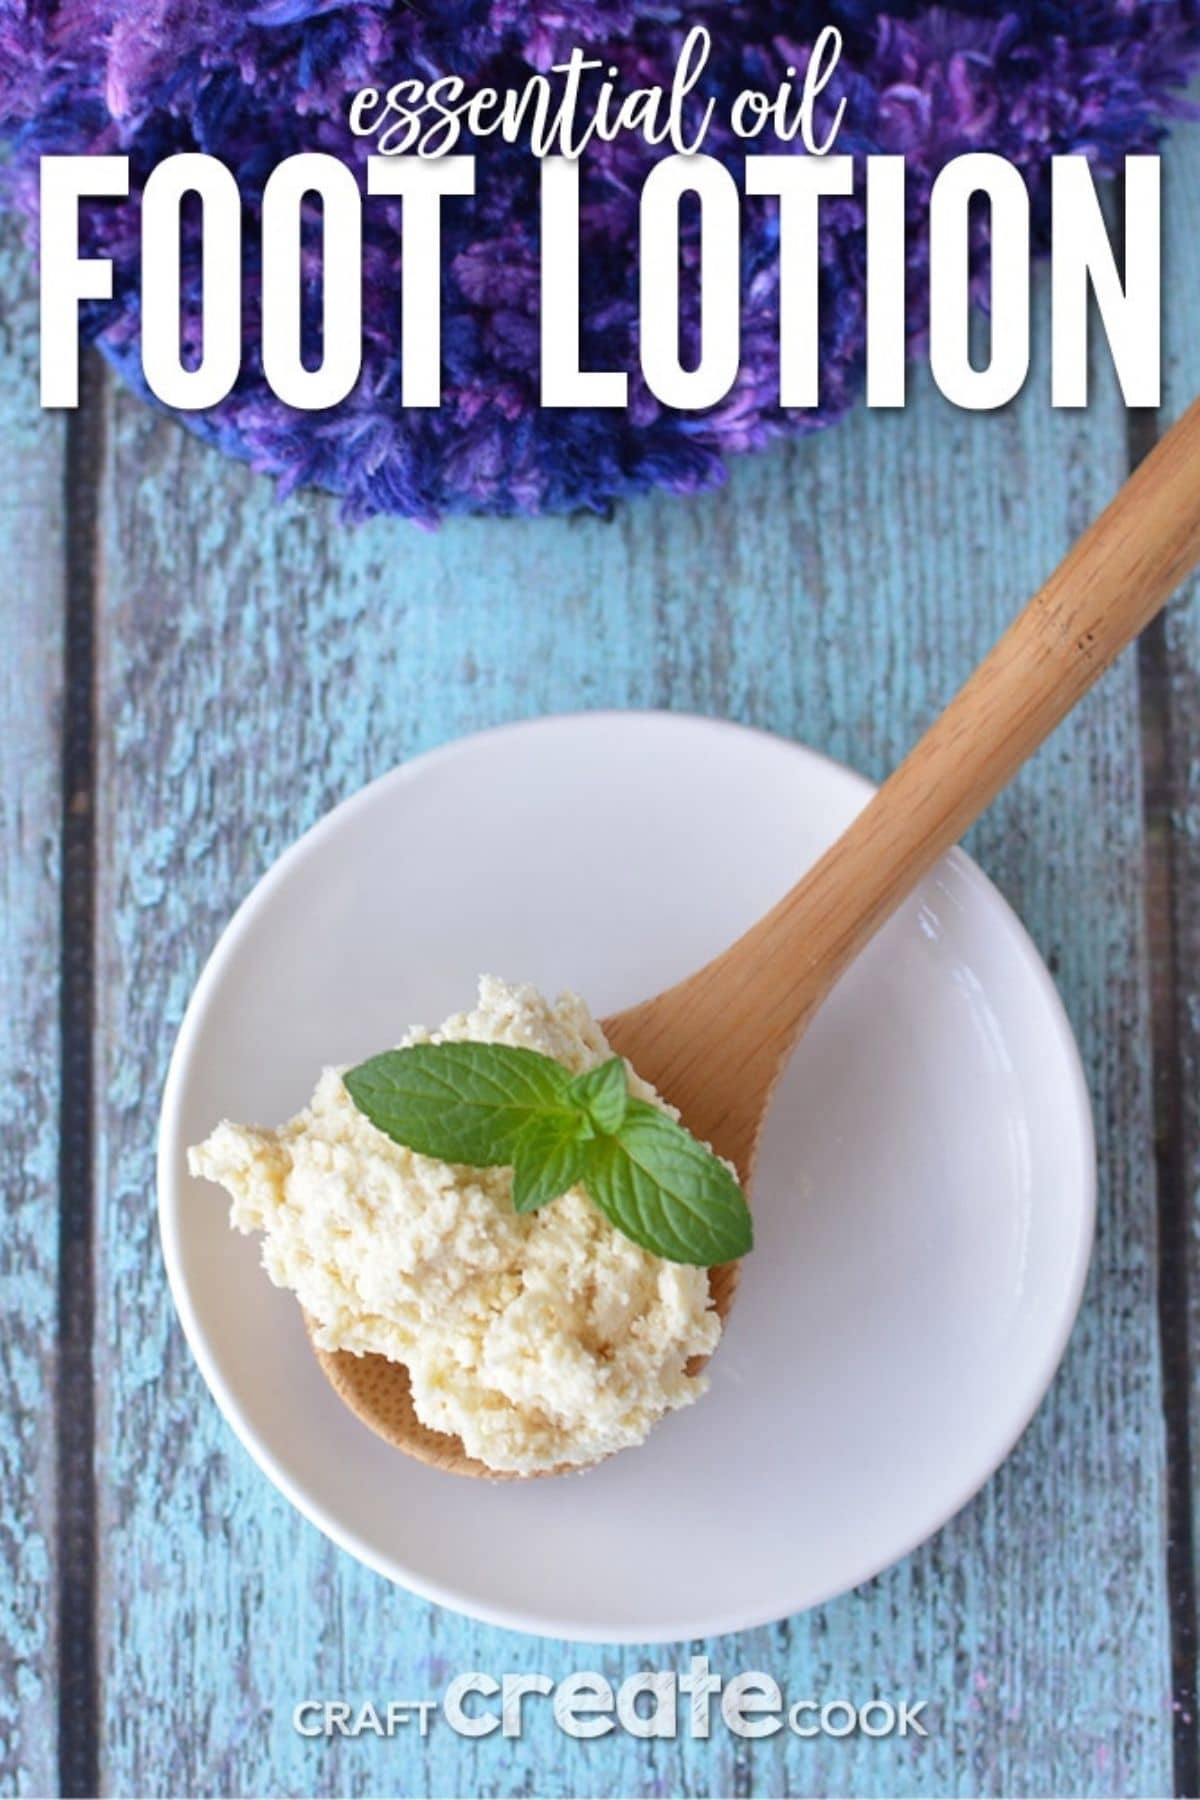 Foot lotion on spoon